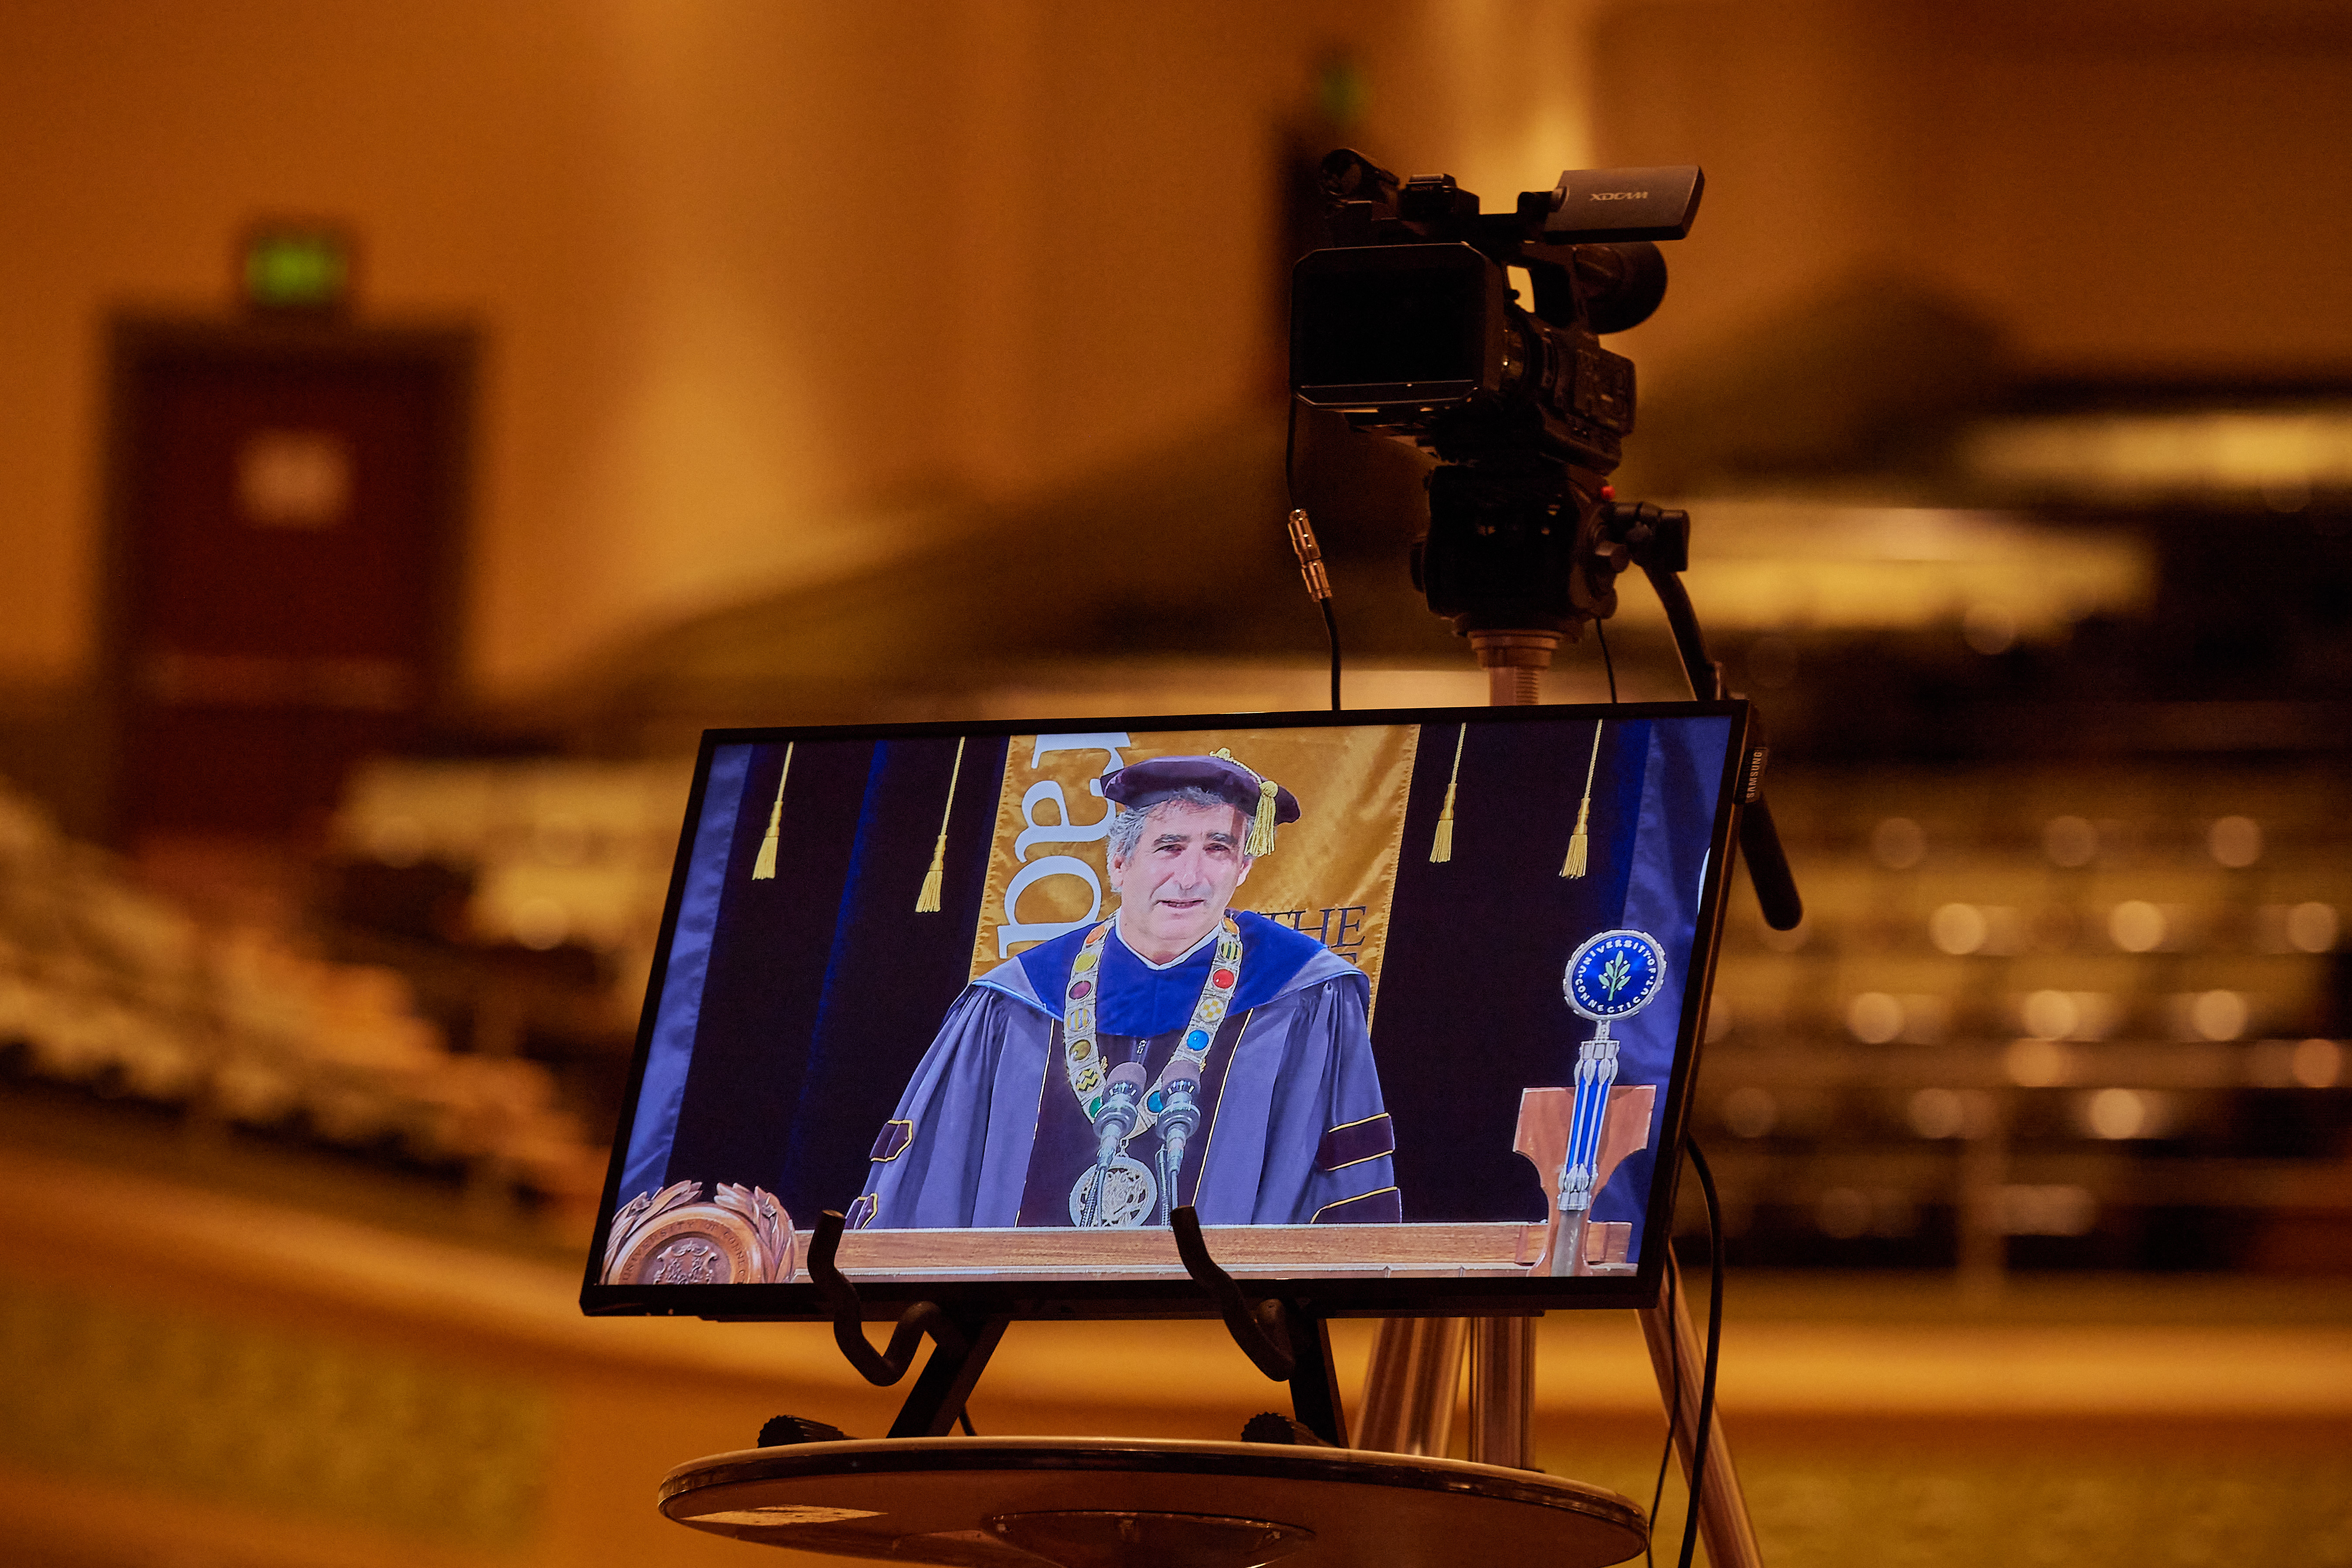 A television monitor shows President Thomas Katsouleas during the virtual Commencement ceremony broadcast from the Jorgensen Center for the Performing Arts on May 9, 2020.